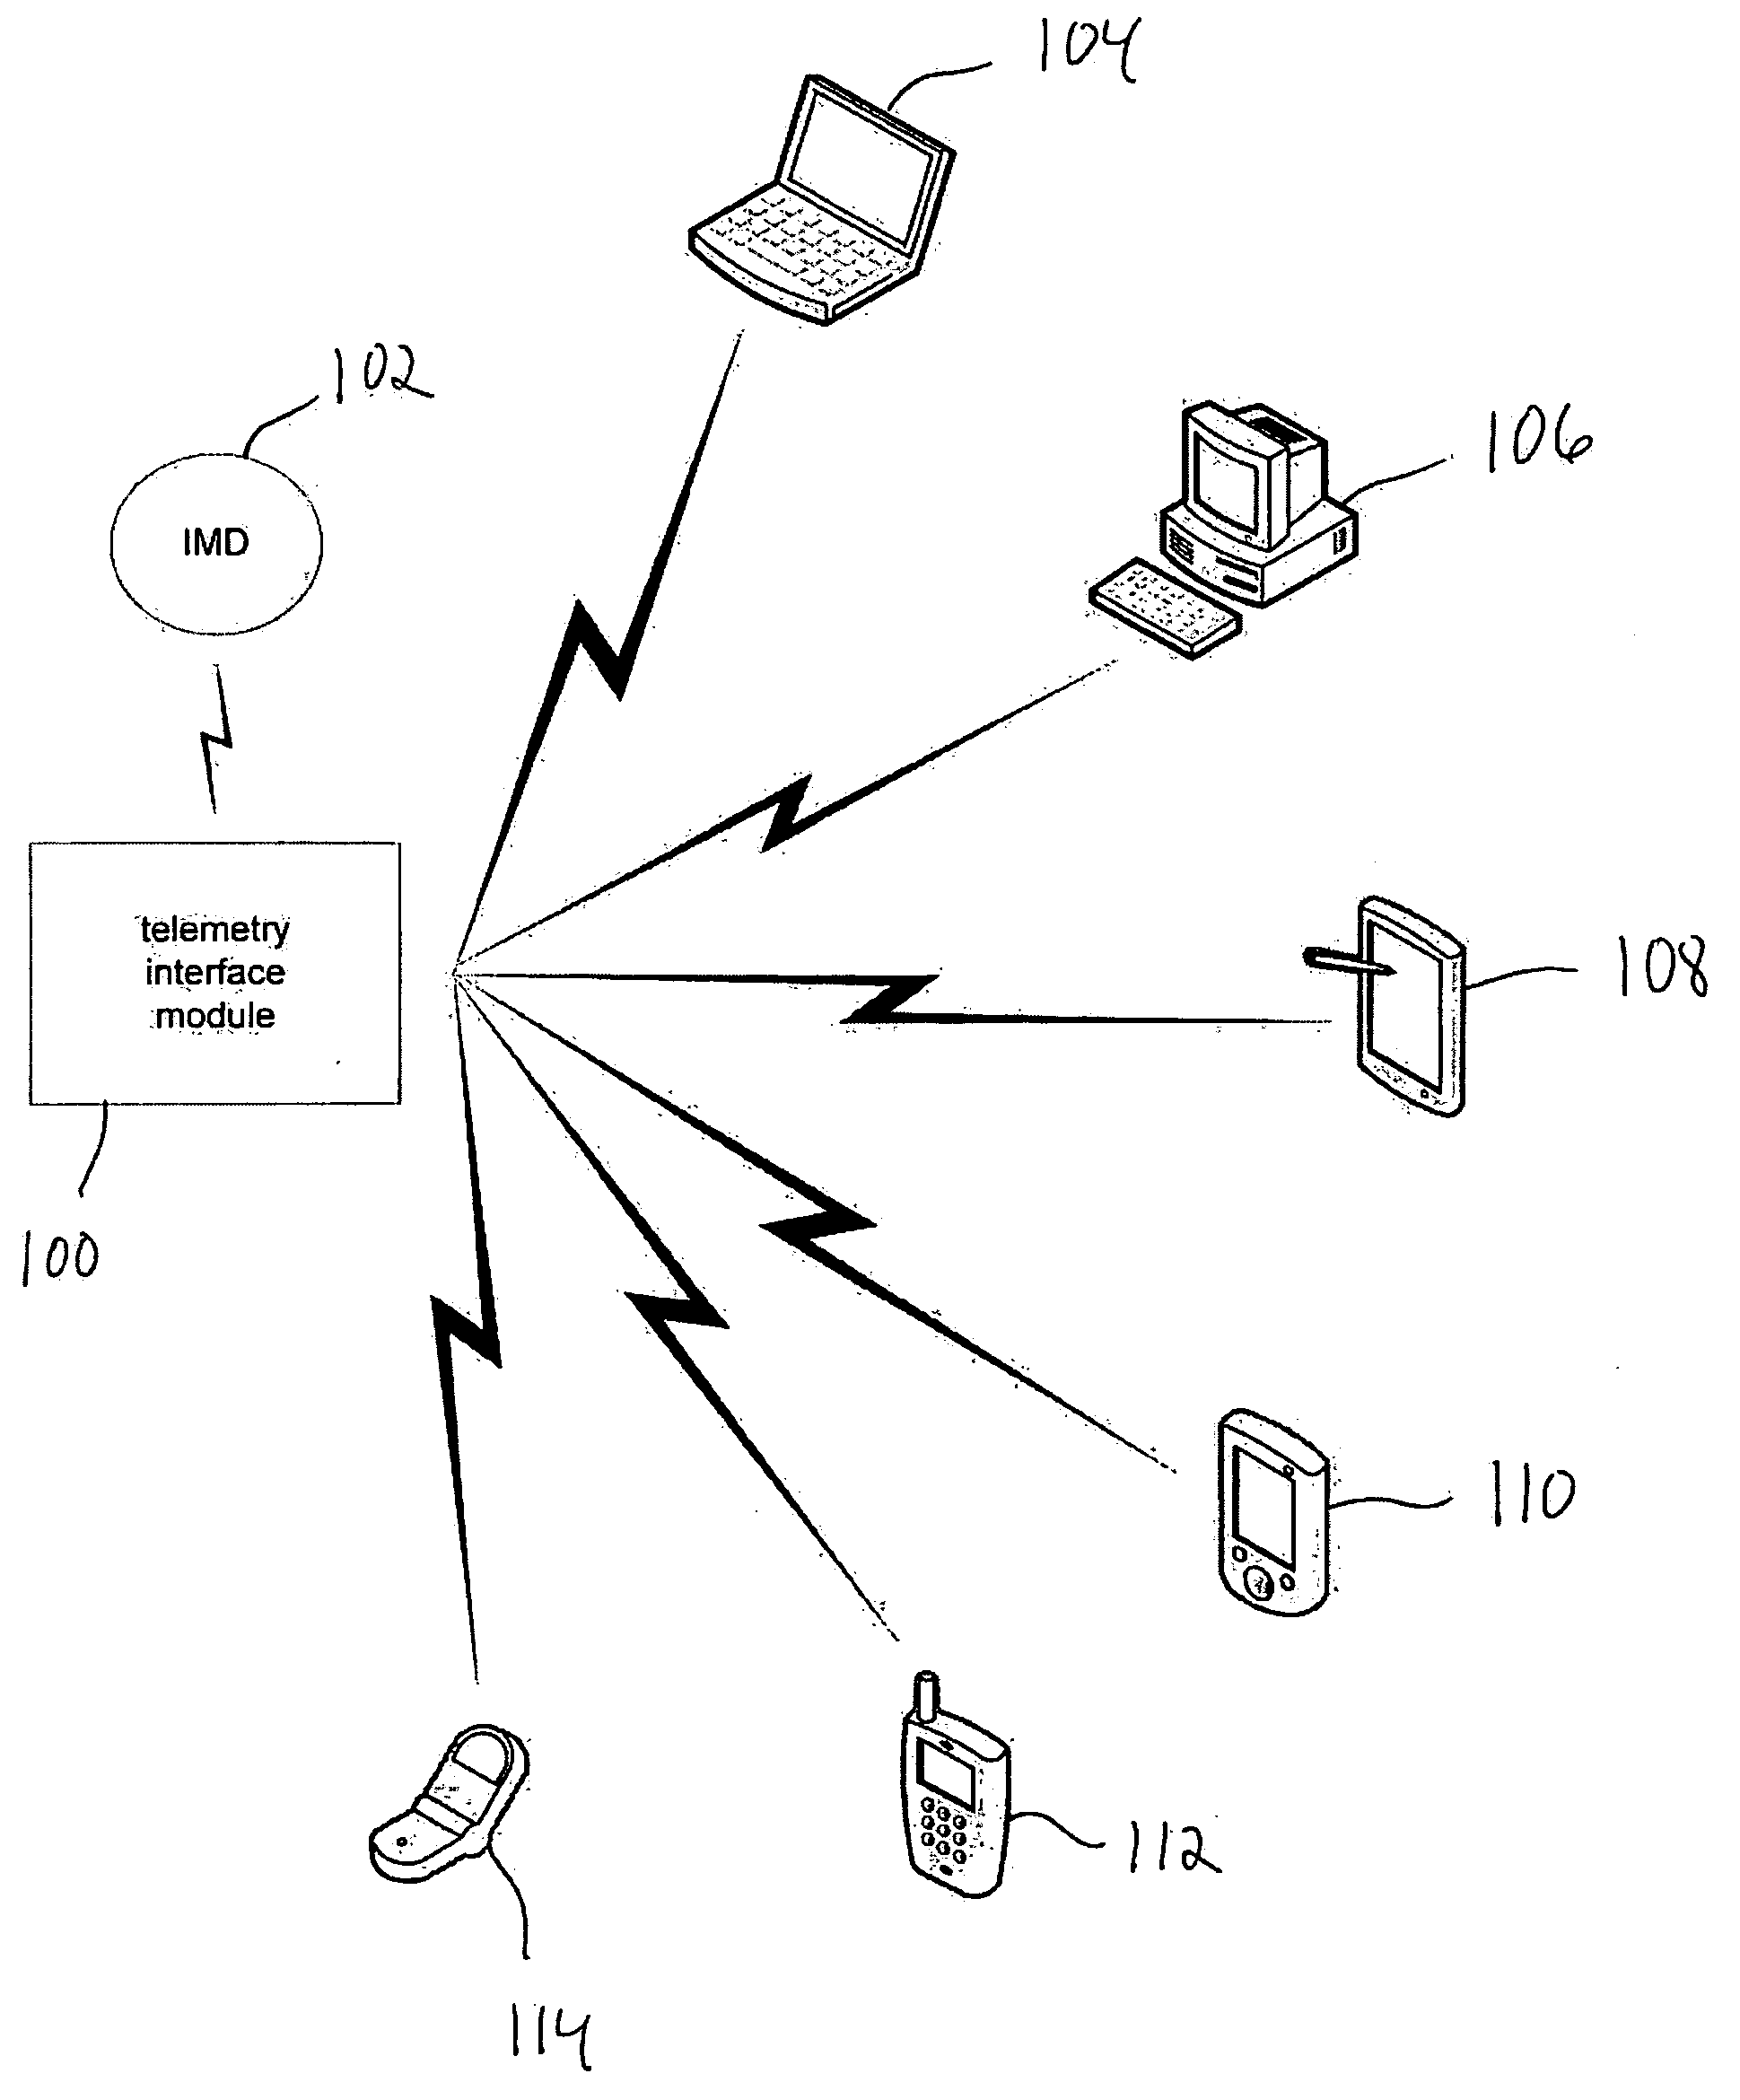 Apparatus and method for serving medical device application content to a remote computing device